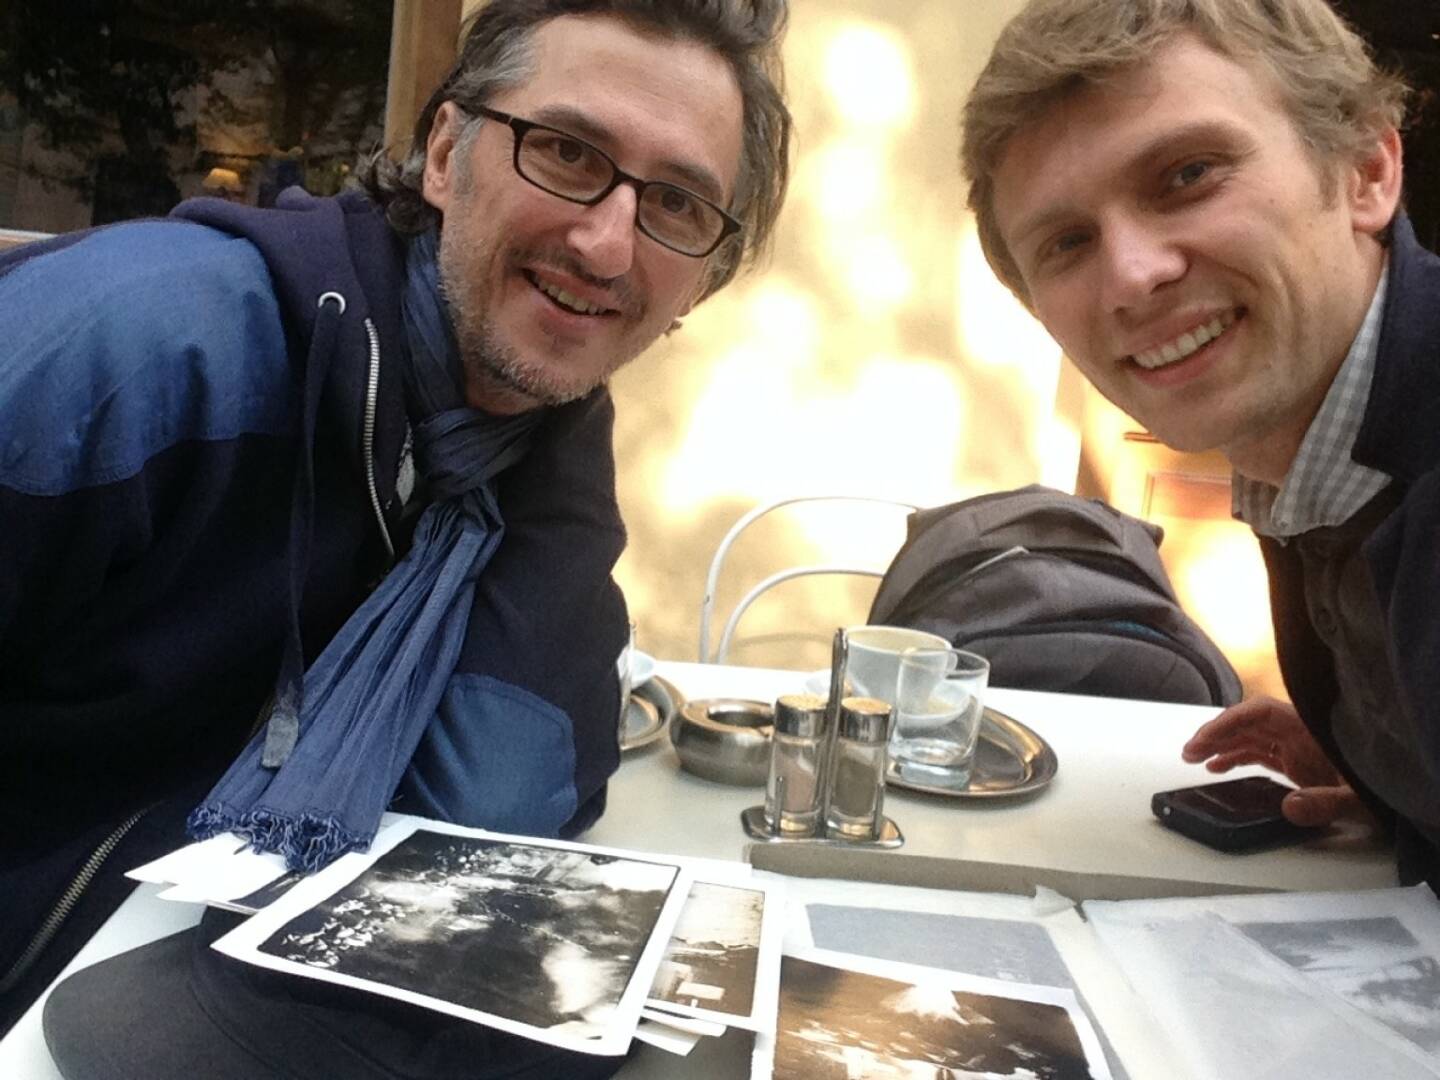 With Sergiy Lebedynskyy (one of the founders of the Shilo group) in Vienna, coffee, prints and a very nice chat! Co-author of the brilliant Euromaidan http://josefchladek.com/book/vladislav_krasnoshek_and_sergiy_lebedynskyy_-_euromaidan